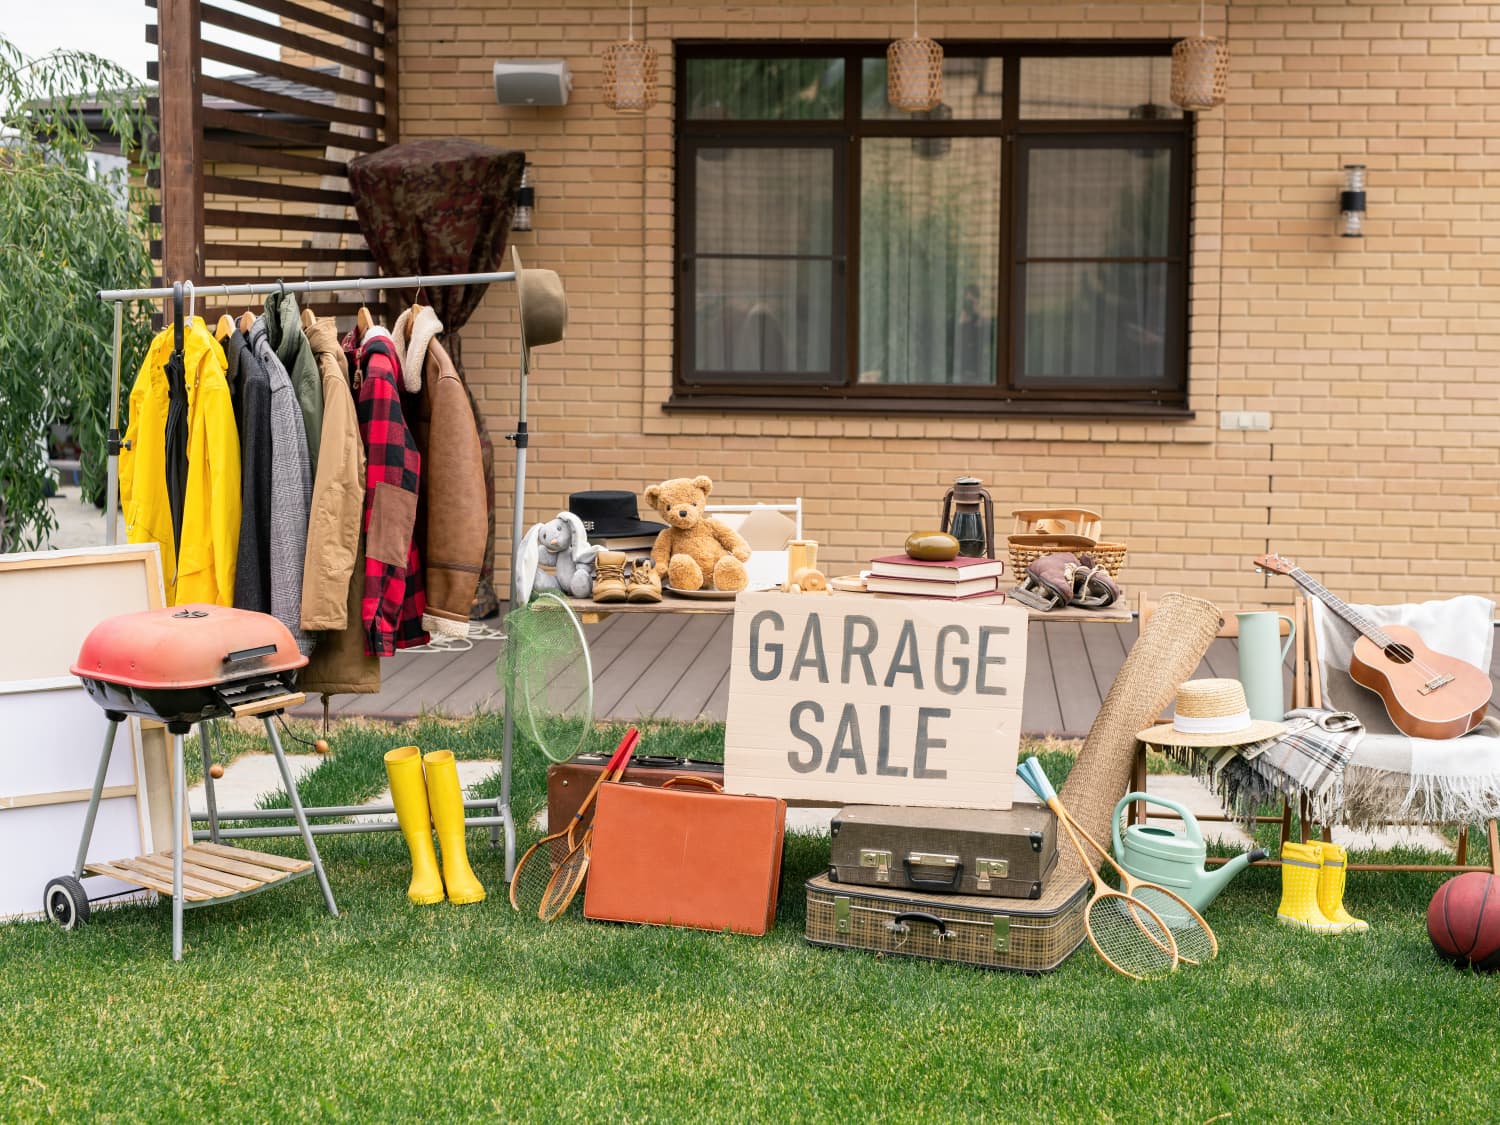 9 Tips for Scoring Good Deals at Yard Sales | Apartment Therapy